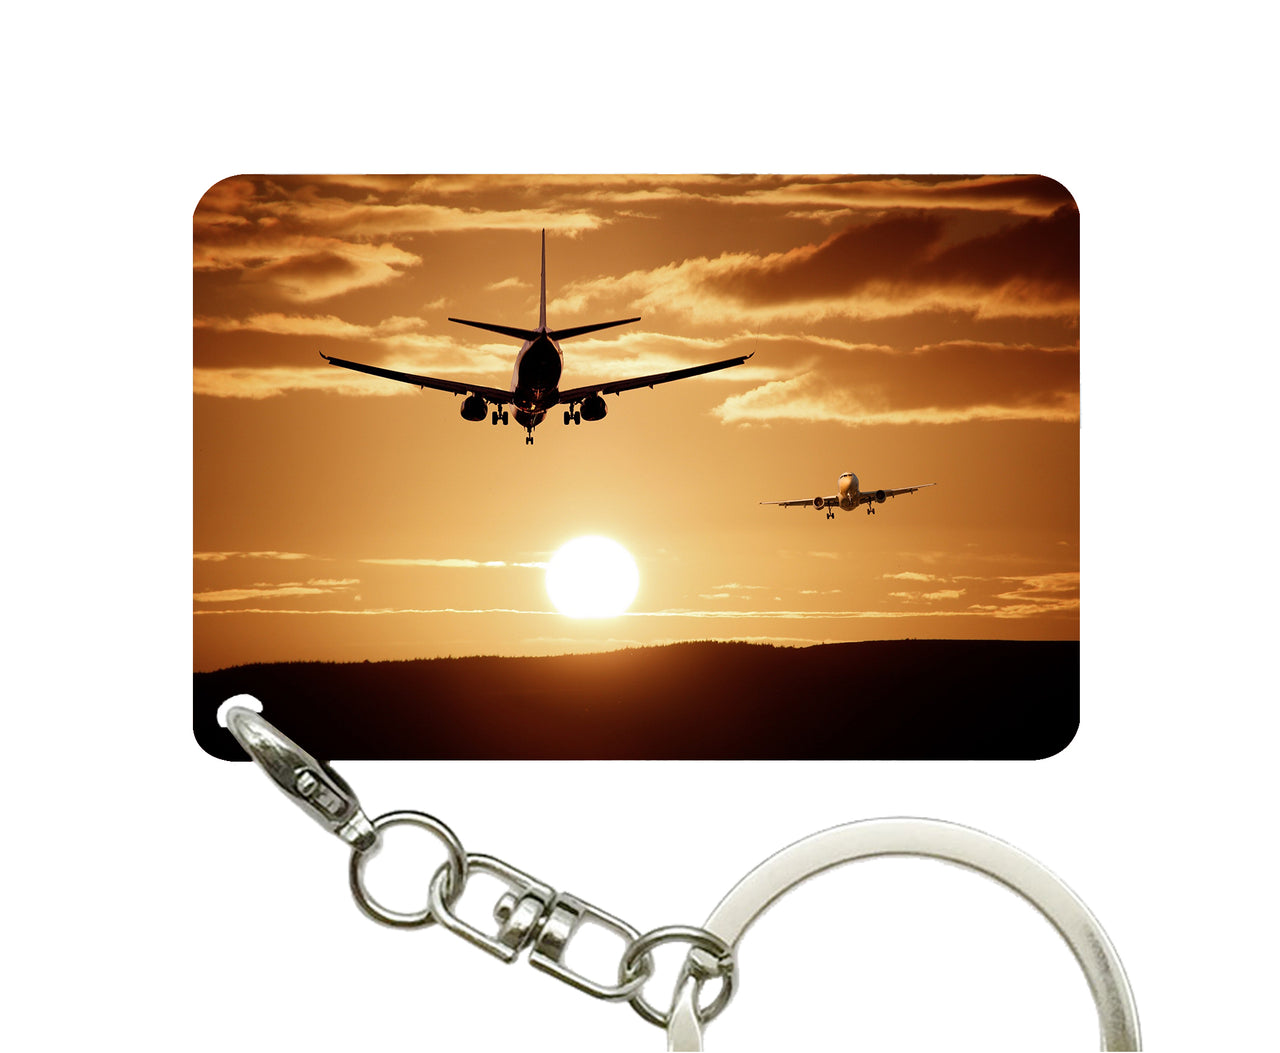 Two Aeroplanes During Sunset Designed Key Chains